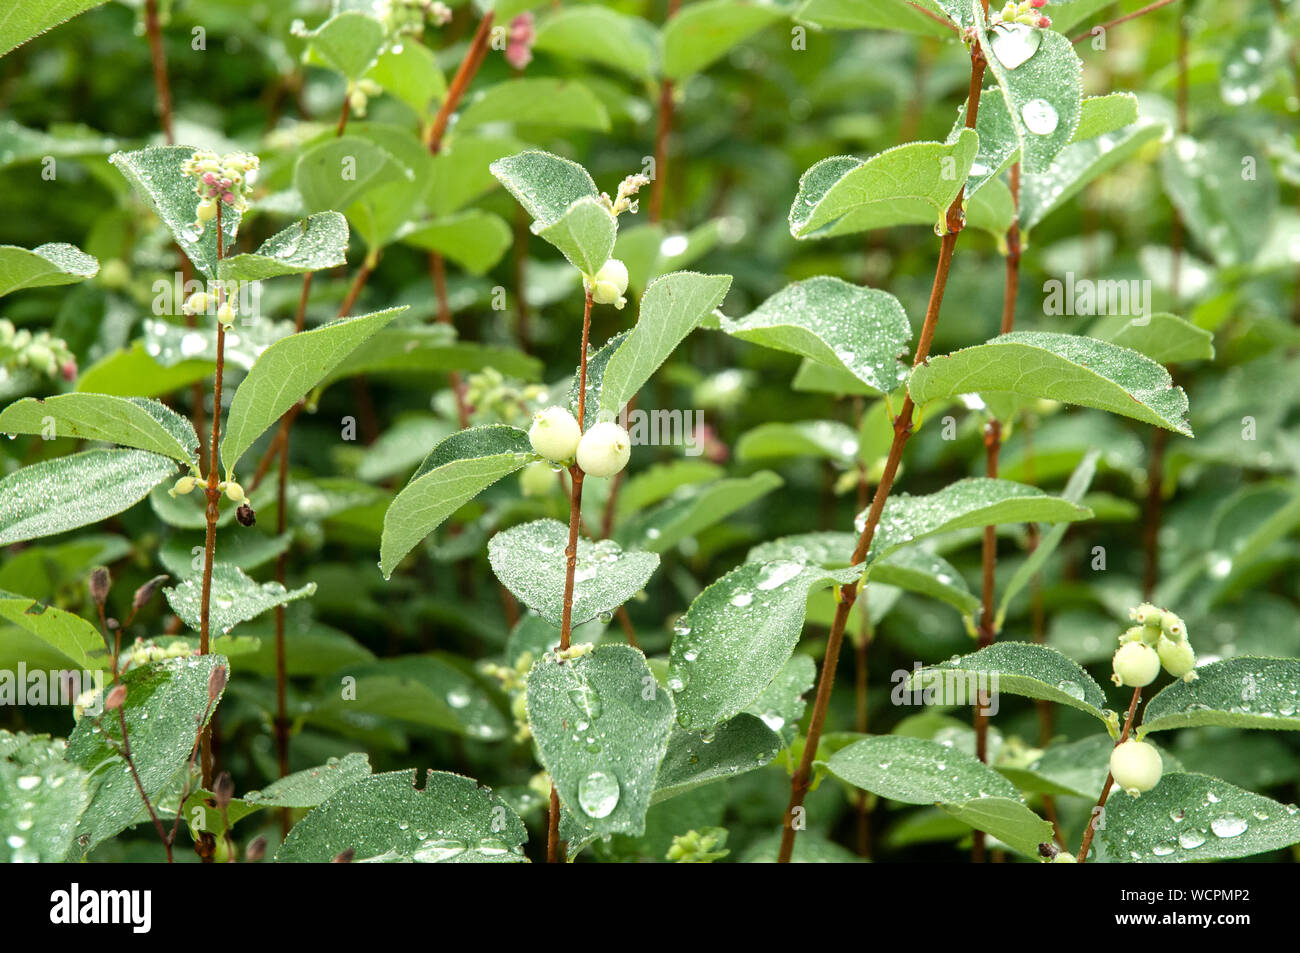 hedge of symphoricarpos albus with rain drops on leaves showing lotus effect Stock Photo